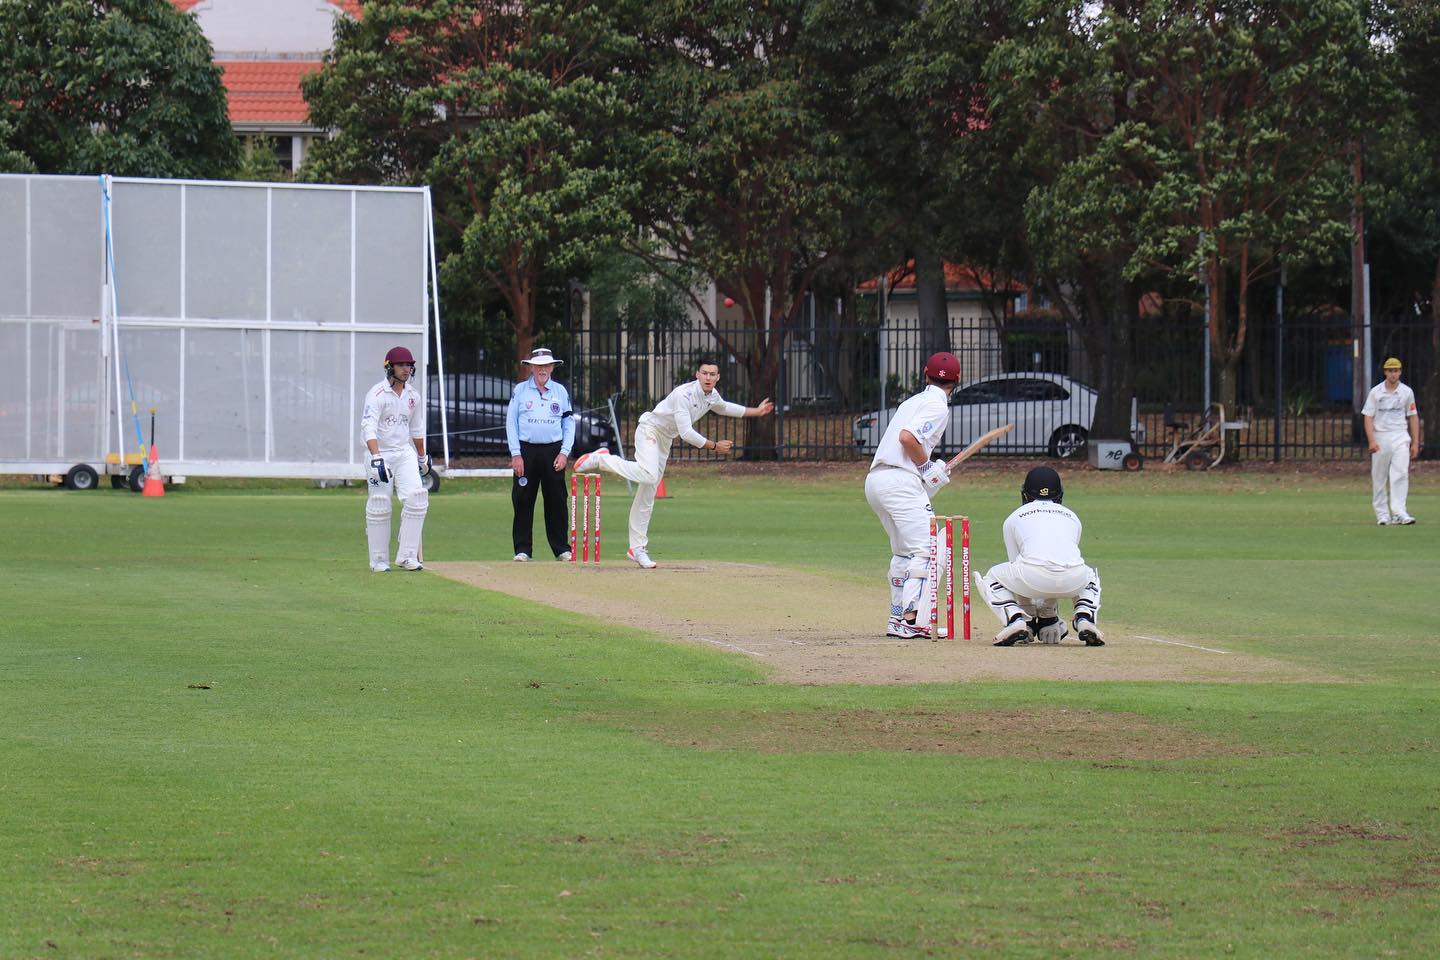 UNSW Cricket Club playing against St George at David Philips field